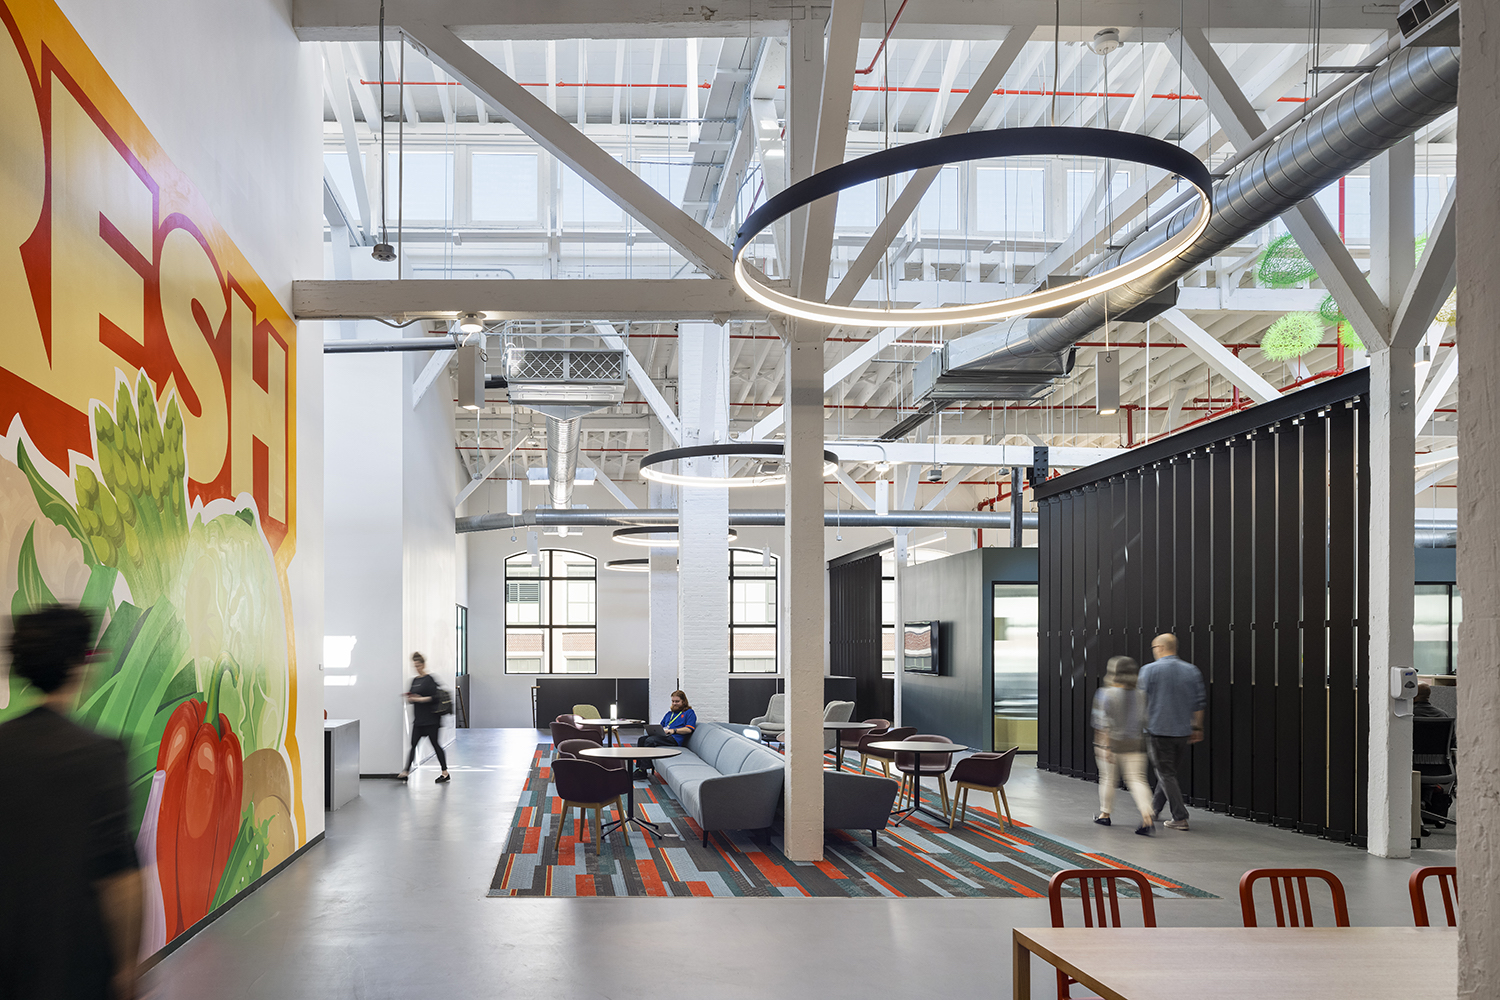 Image of the interior of the City Harvest building, in Brooklyn NY, by Ennead Architects.